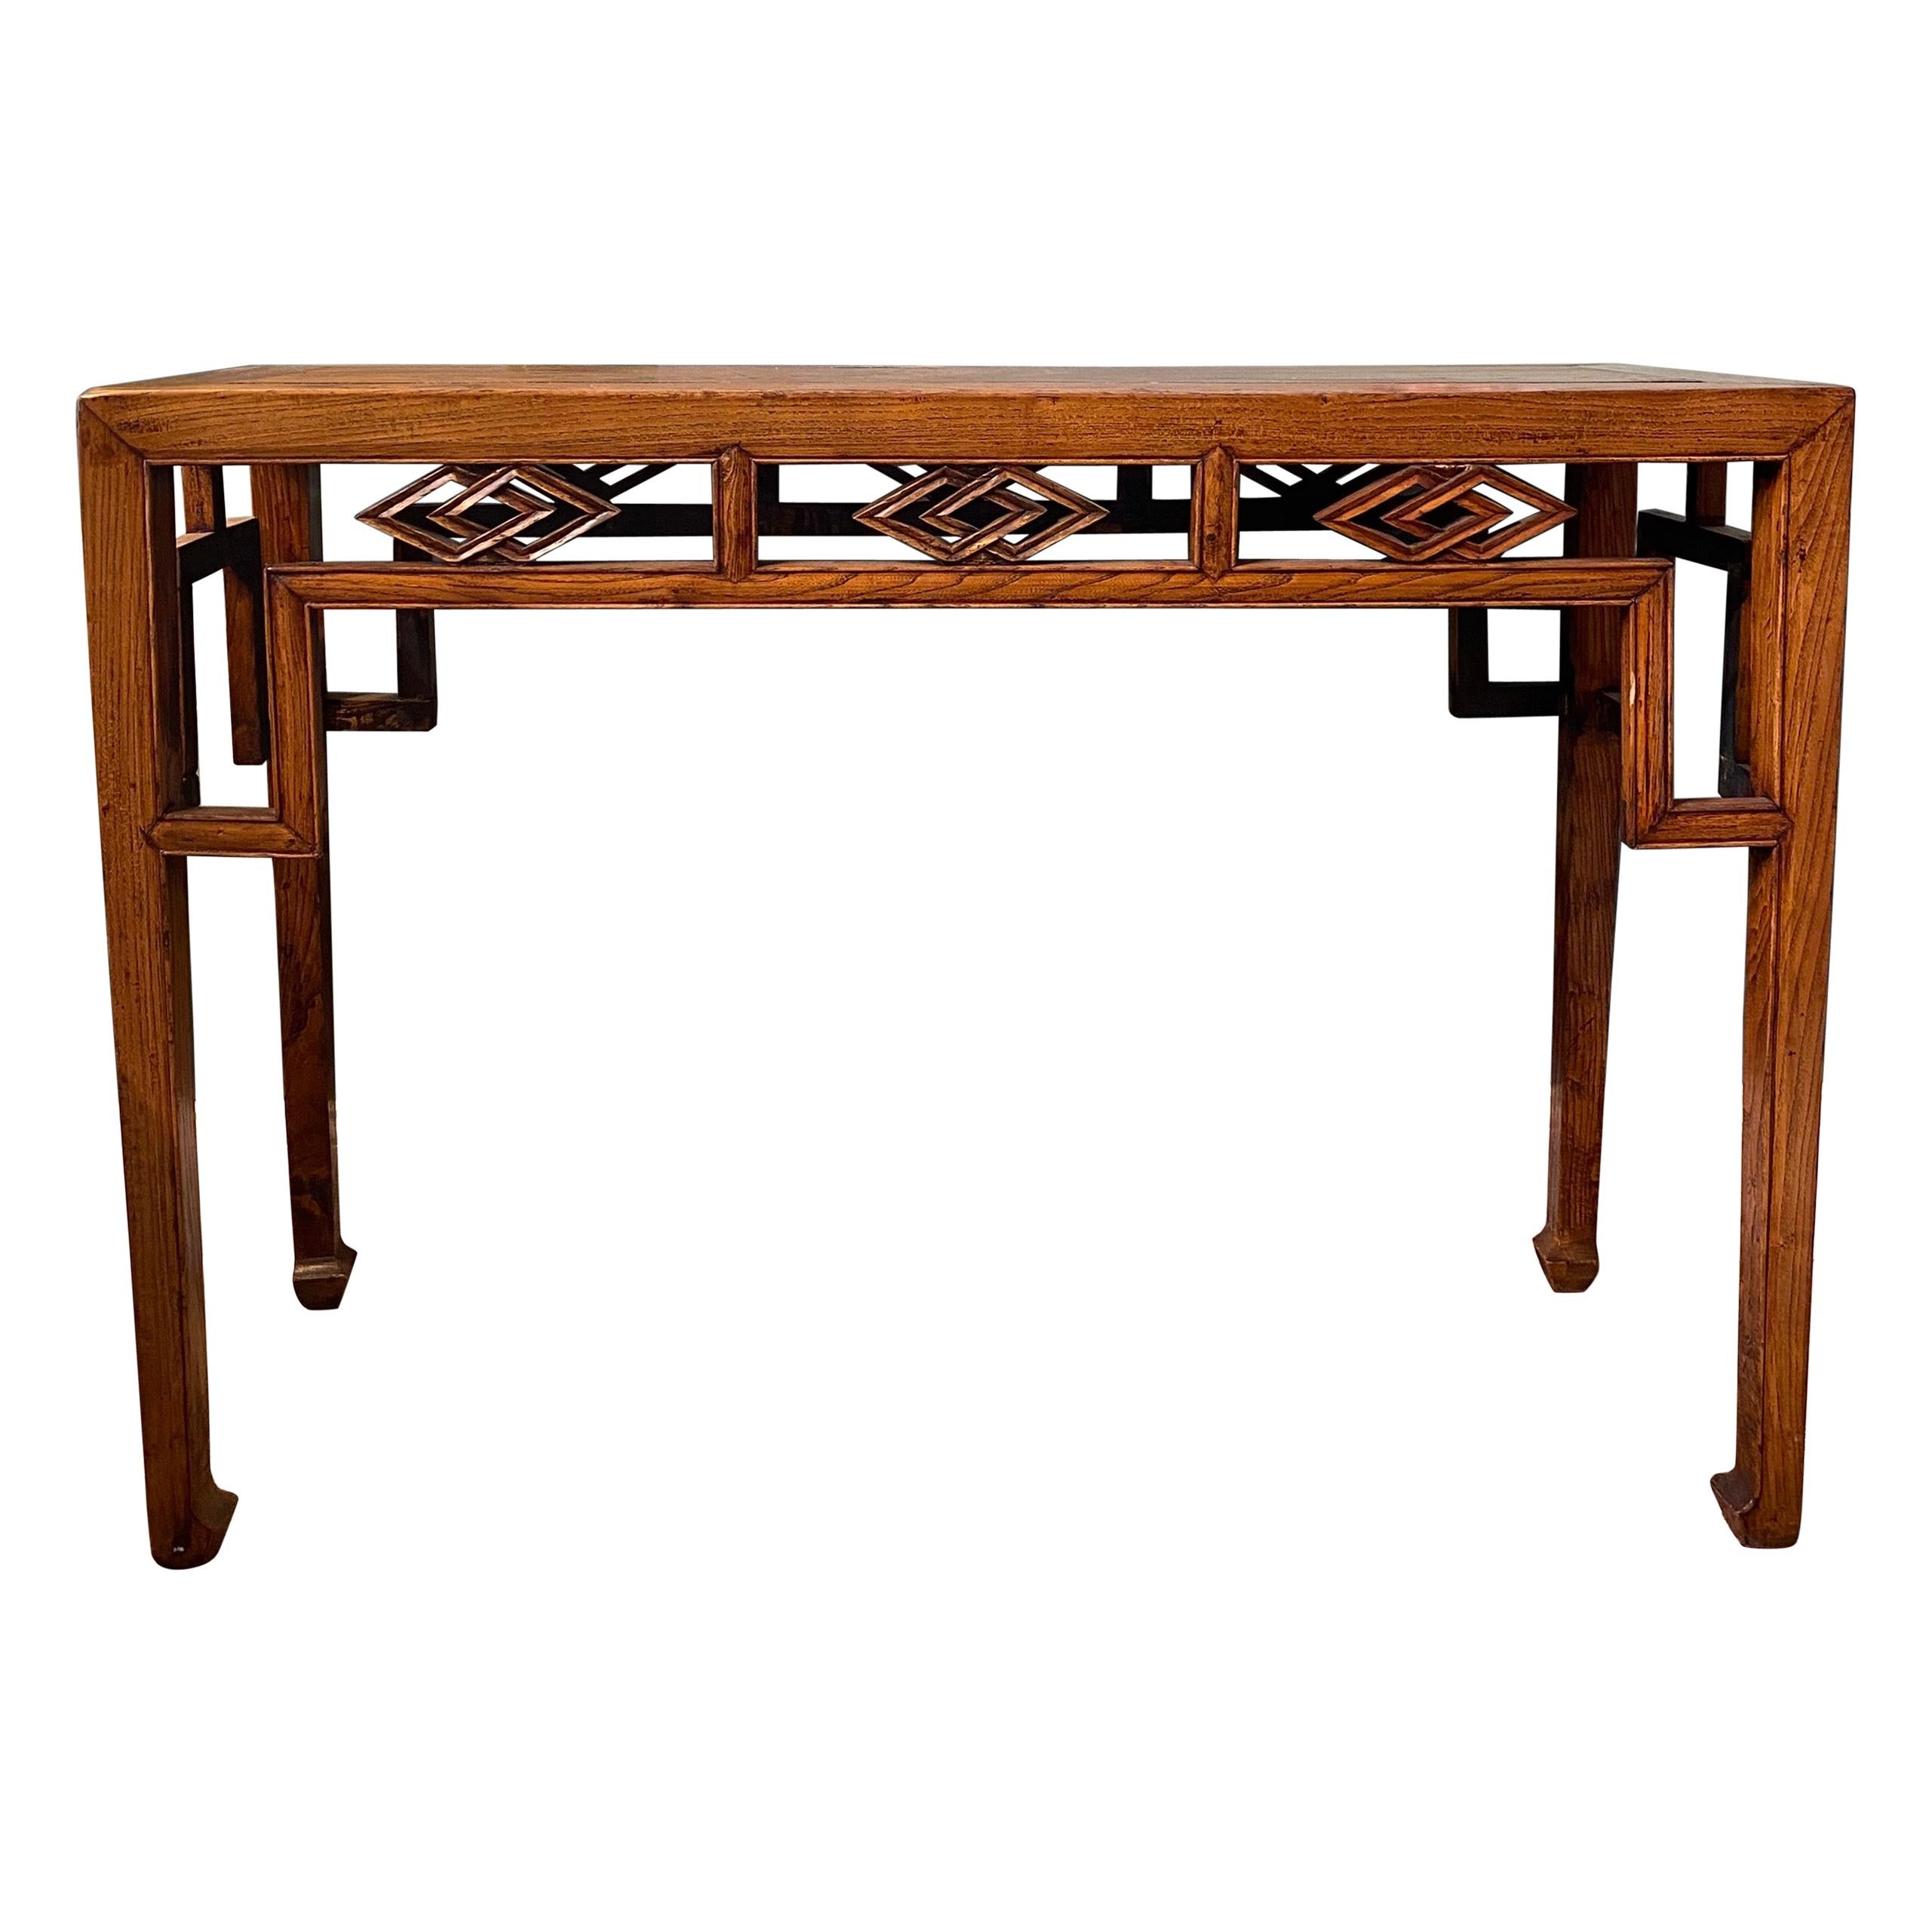 Graceful Antique Chinese Wood Console Table For Sale